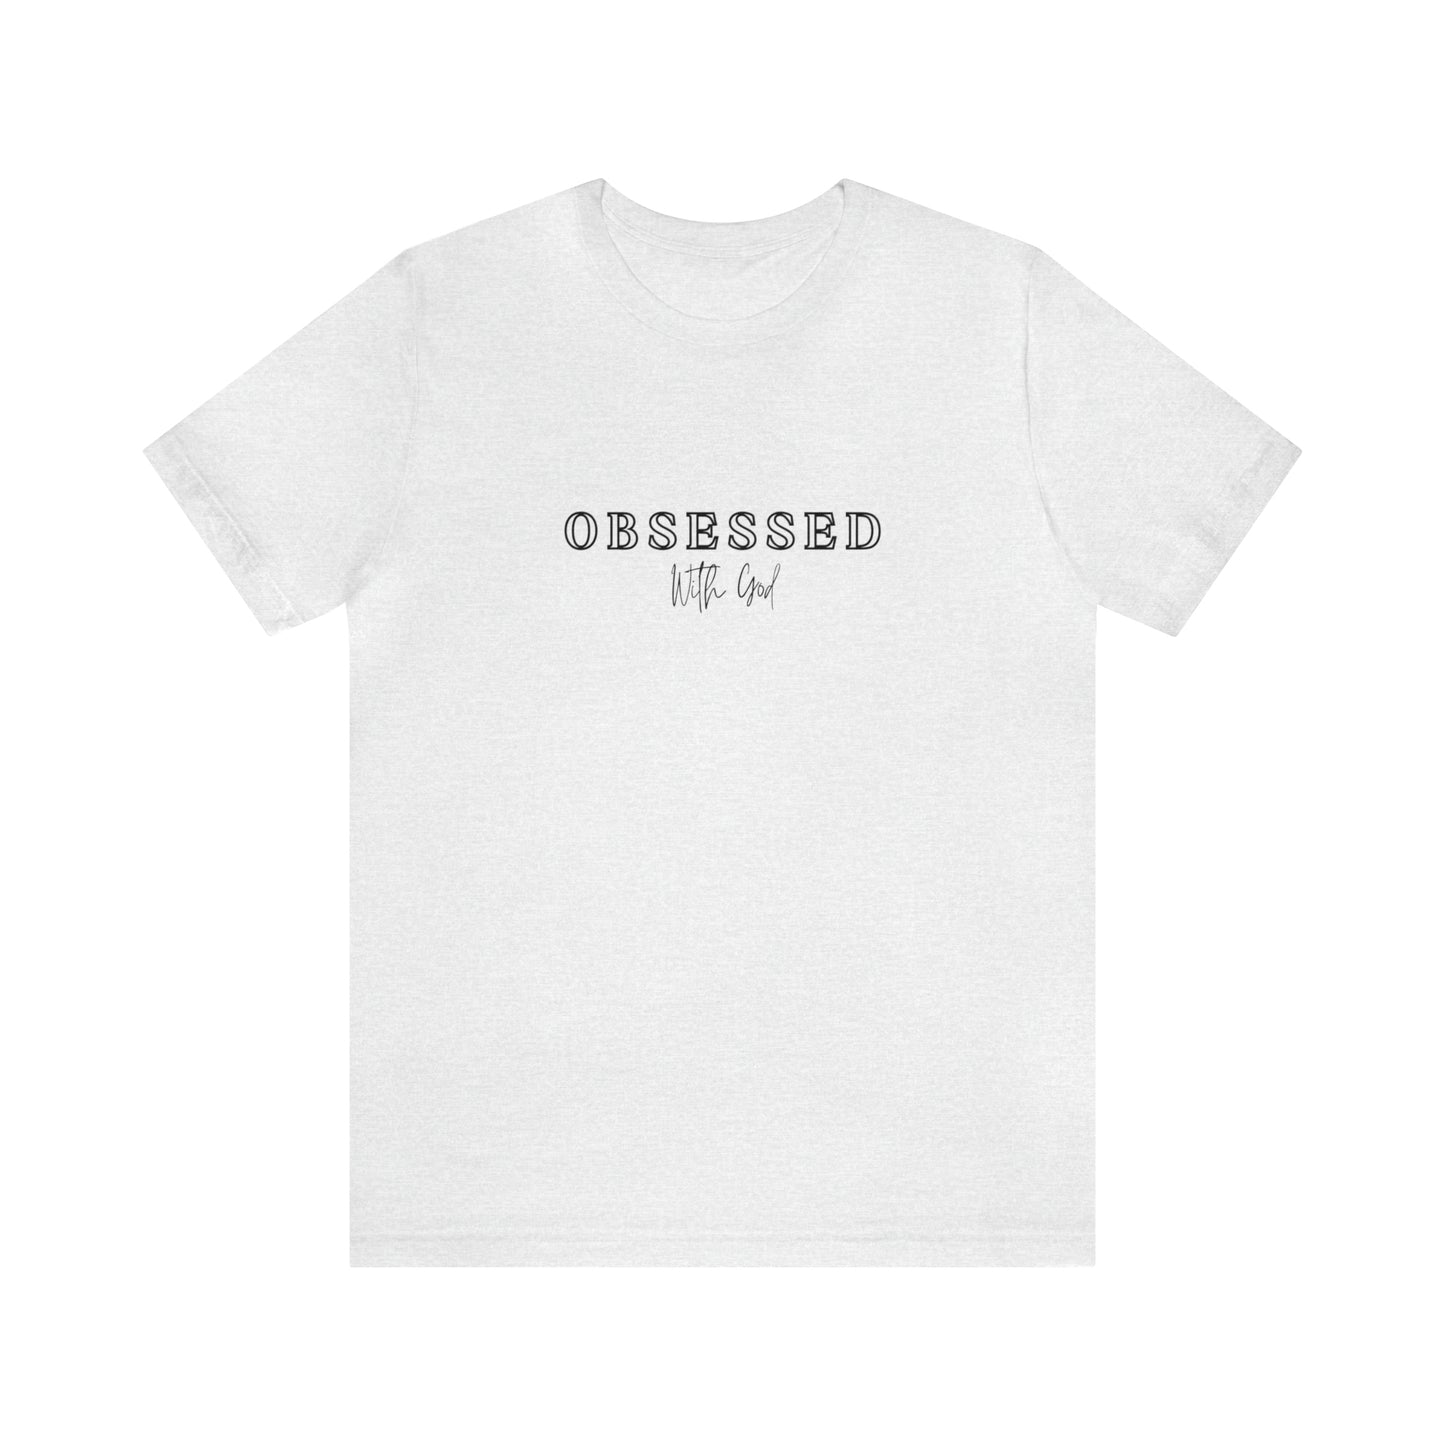 Obsessed with God T-shirt